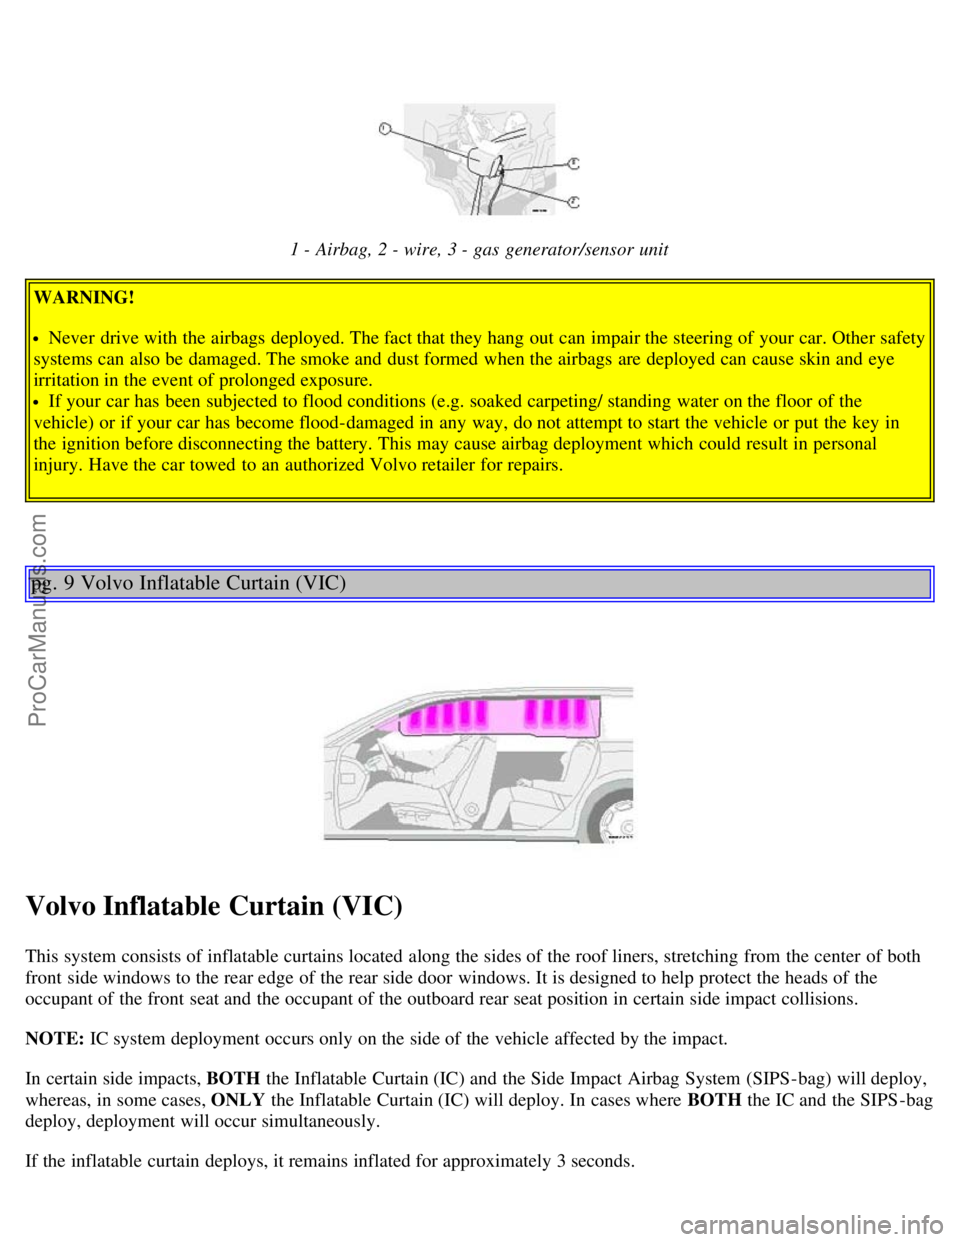 VOLVO V70 2003  Owners Manual 1 - Airbag, 2 - wire, 3 - gas generator/sensor unit
WARNING!
Never  drive with the airbags deployed. The fact that they hang  out can impair the steering of your car. Other safety
systems can also be 